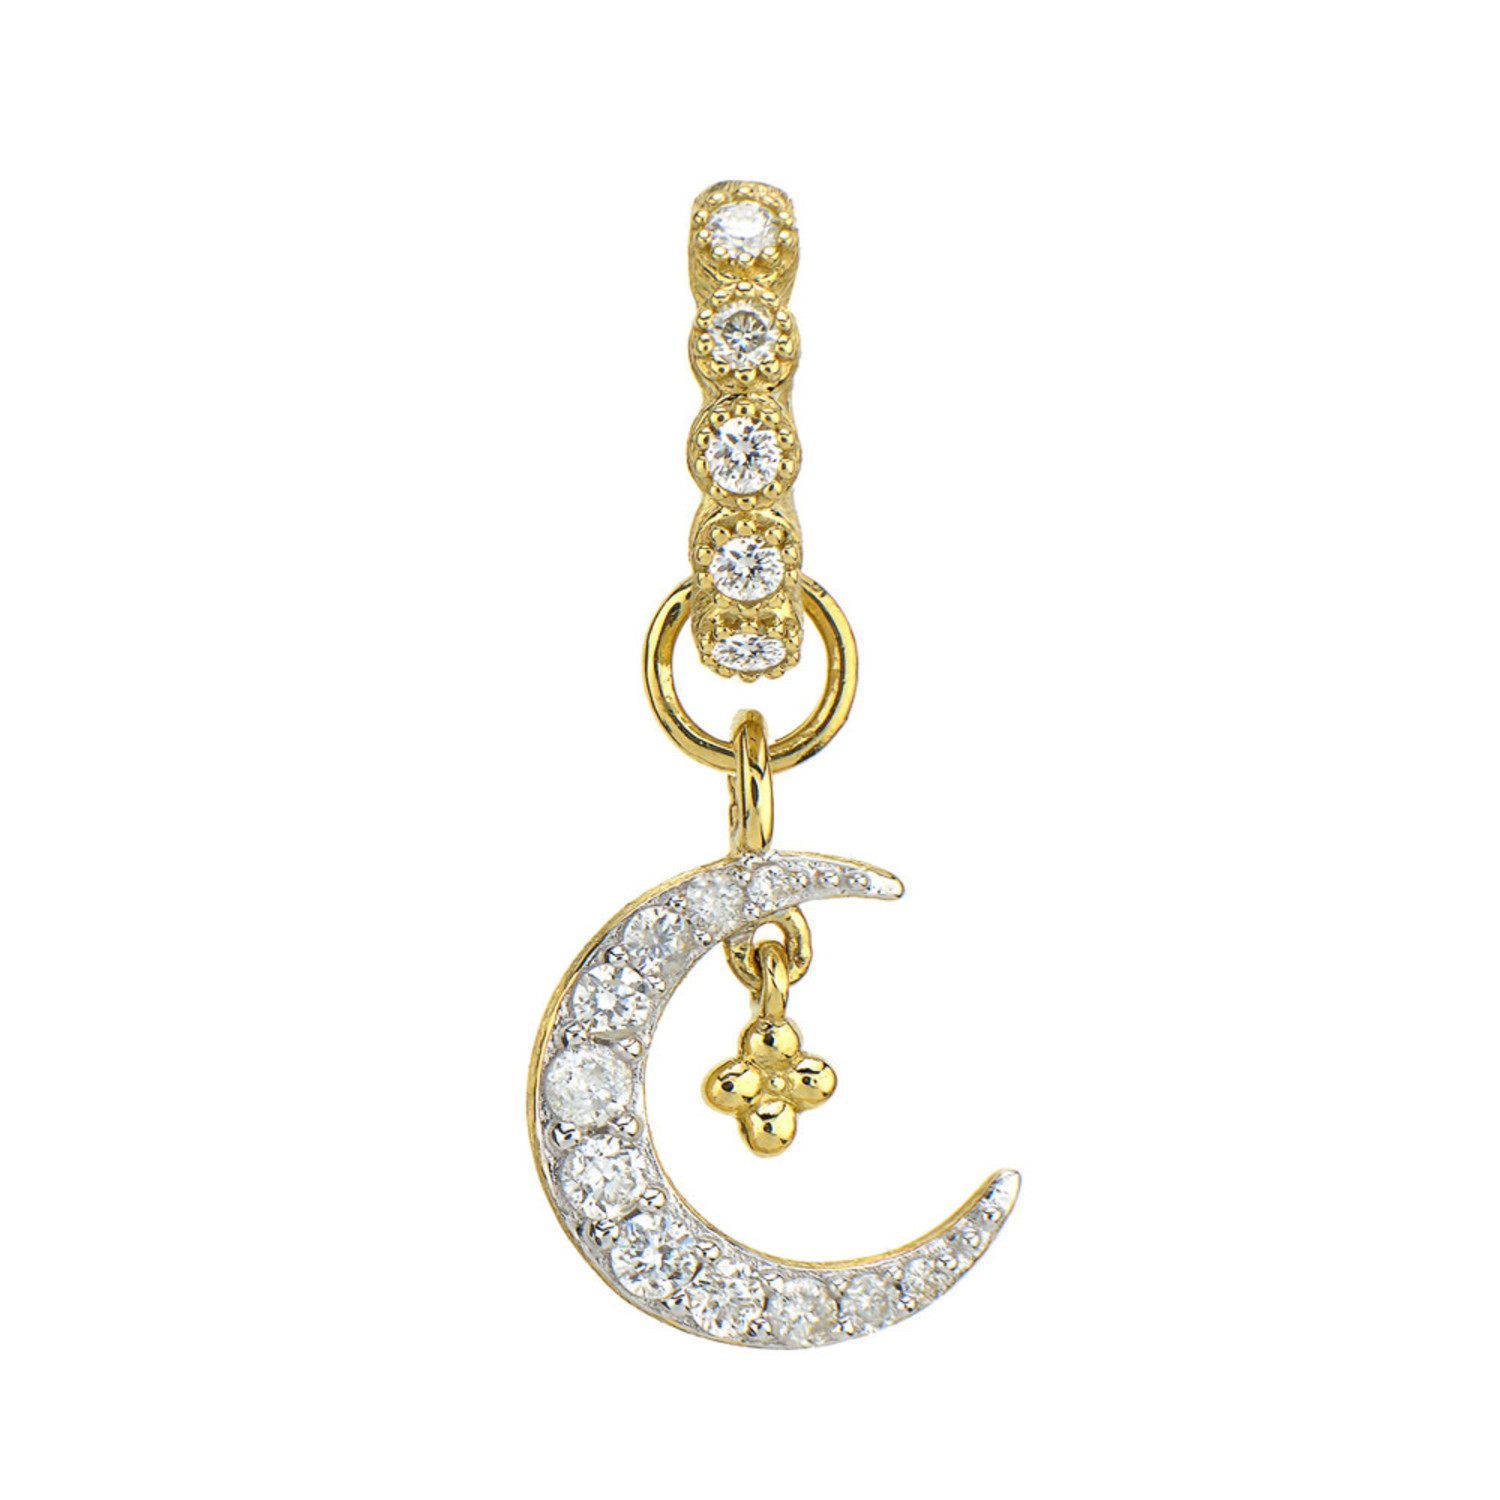 Details about   Crescent Half Moon Pendant Religious Handmade 925 Silver Pave Diamond Jewelry